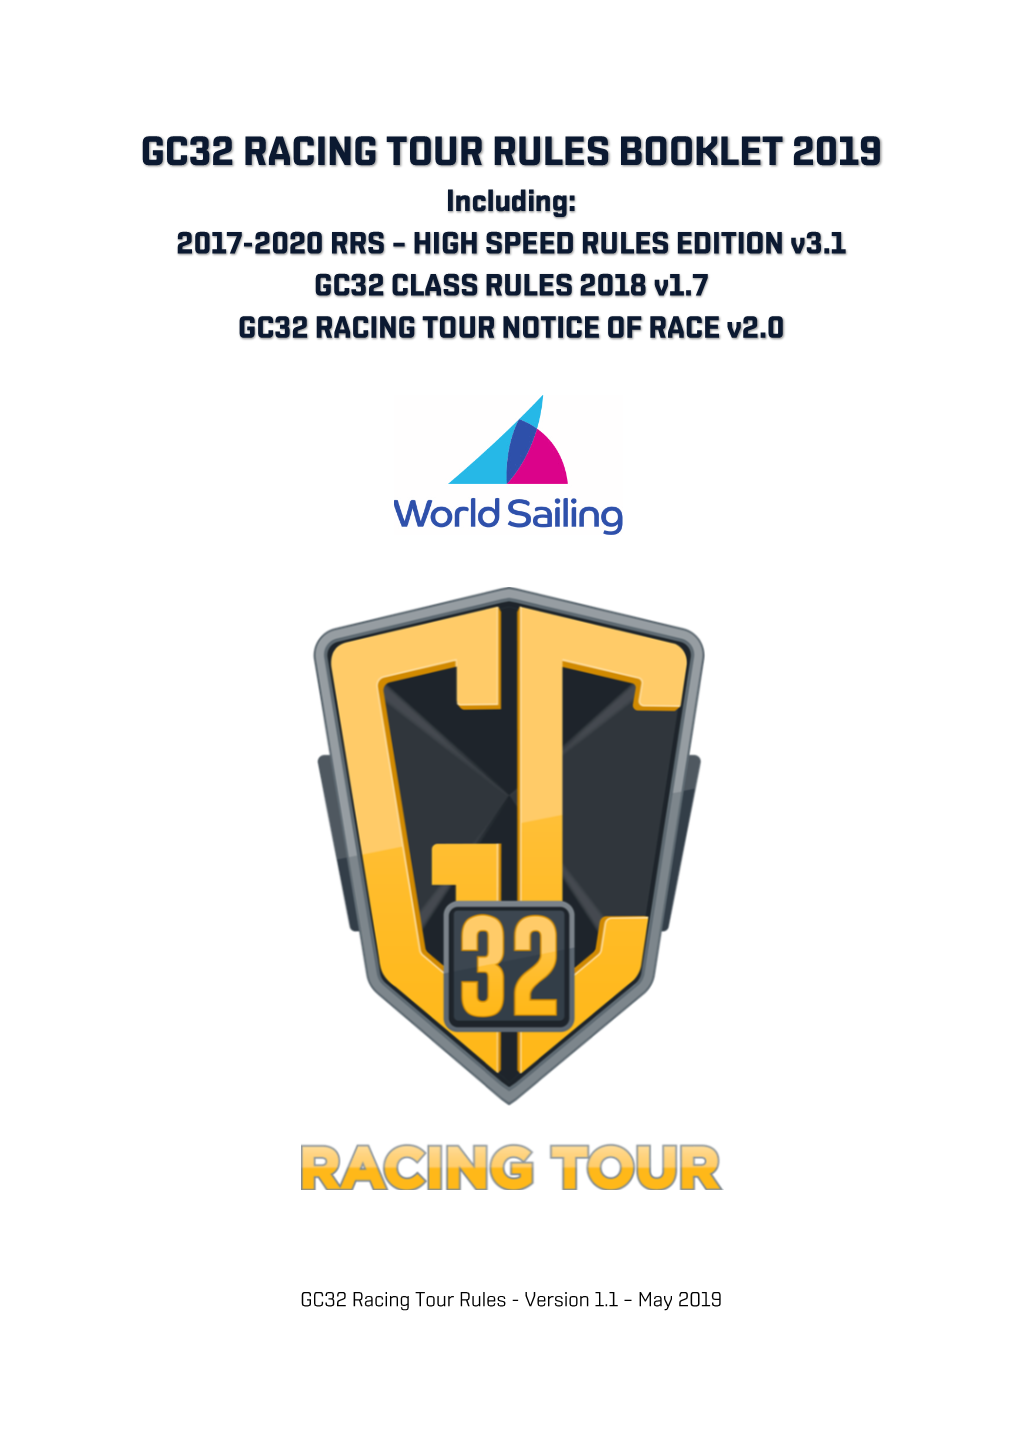 GC32 RACING TOUR RULES BOOKLET 2019 Including: 2017-2020 RRS – HIGH SPEED RULES EDITION V3.1 GC32 CLASS RULES 2018 V1.7 GC32 RACING TOUR NOTICE of RACE V2.0